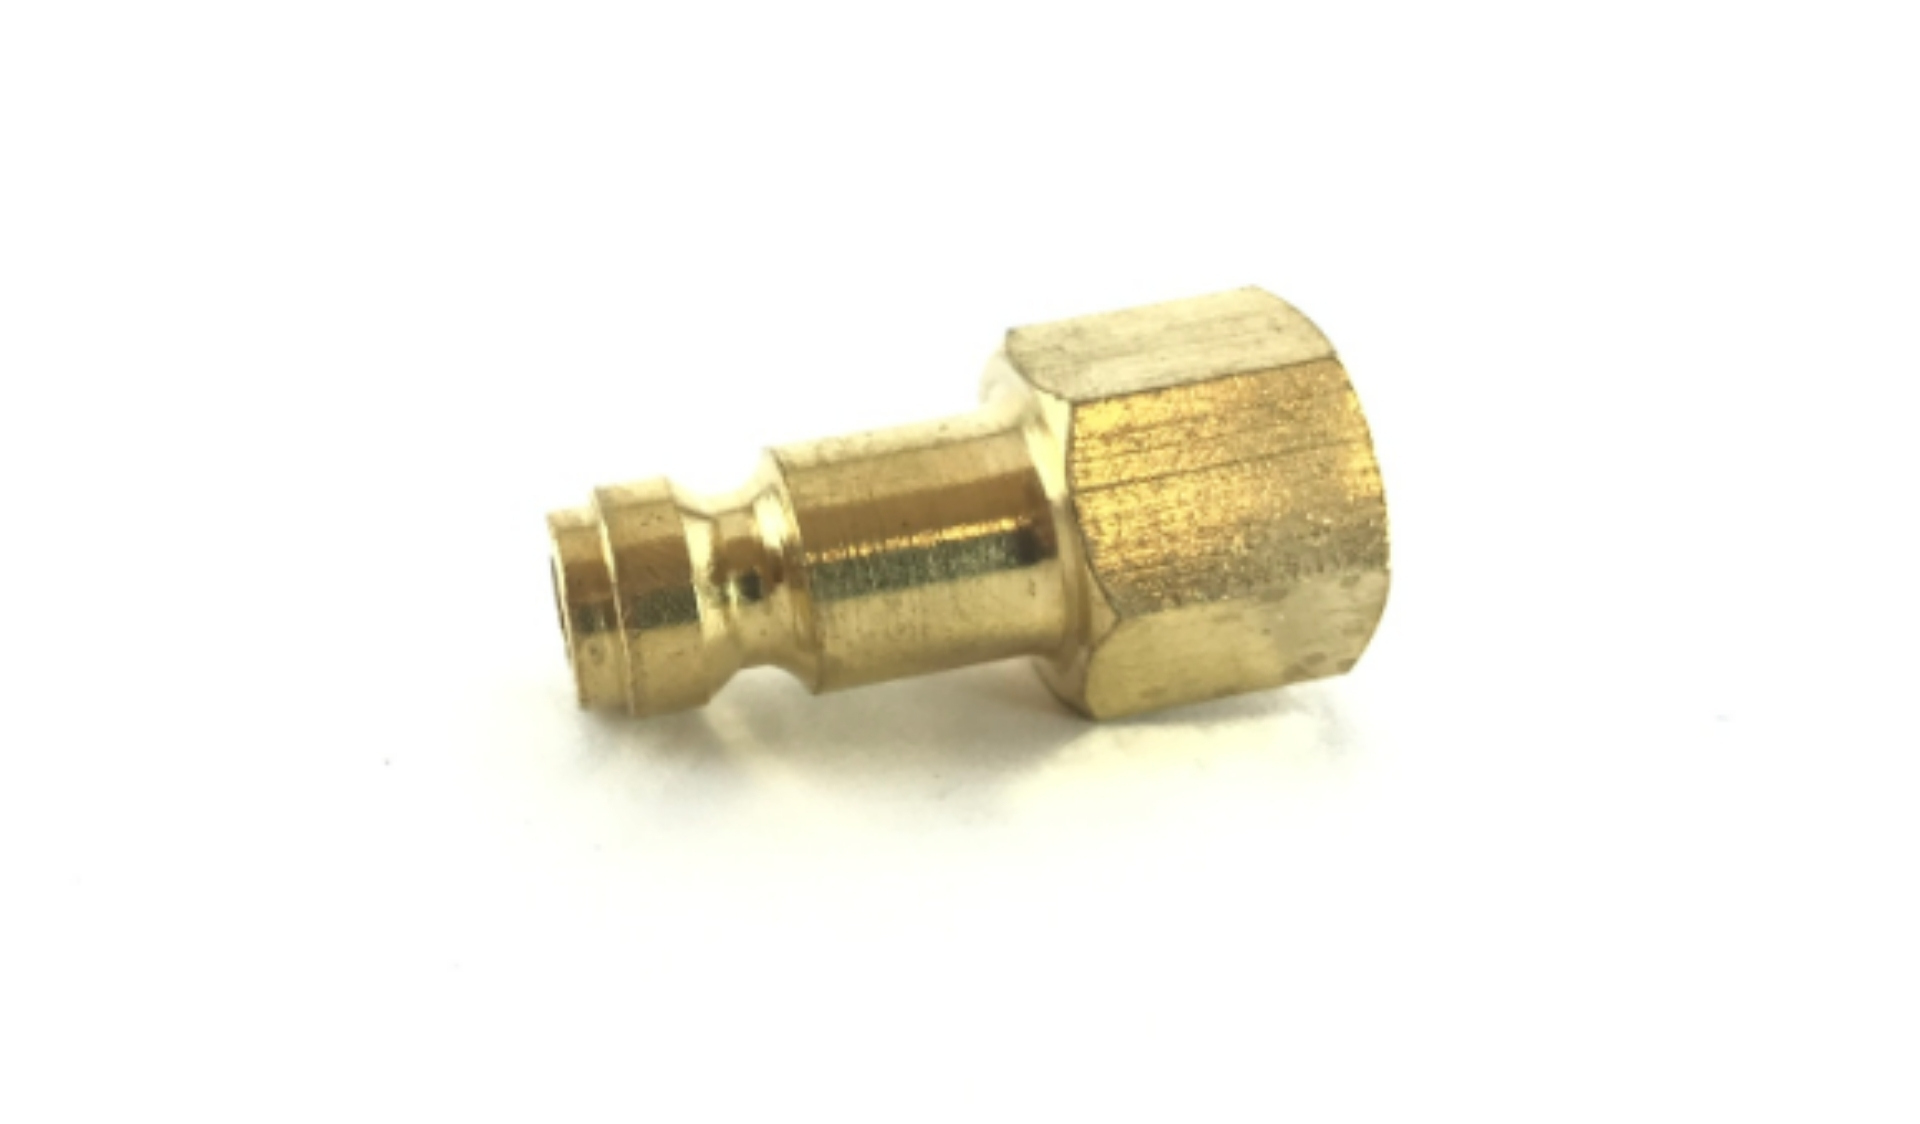 1/4” Female Brass Connector image